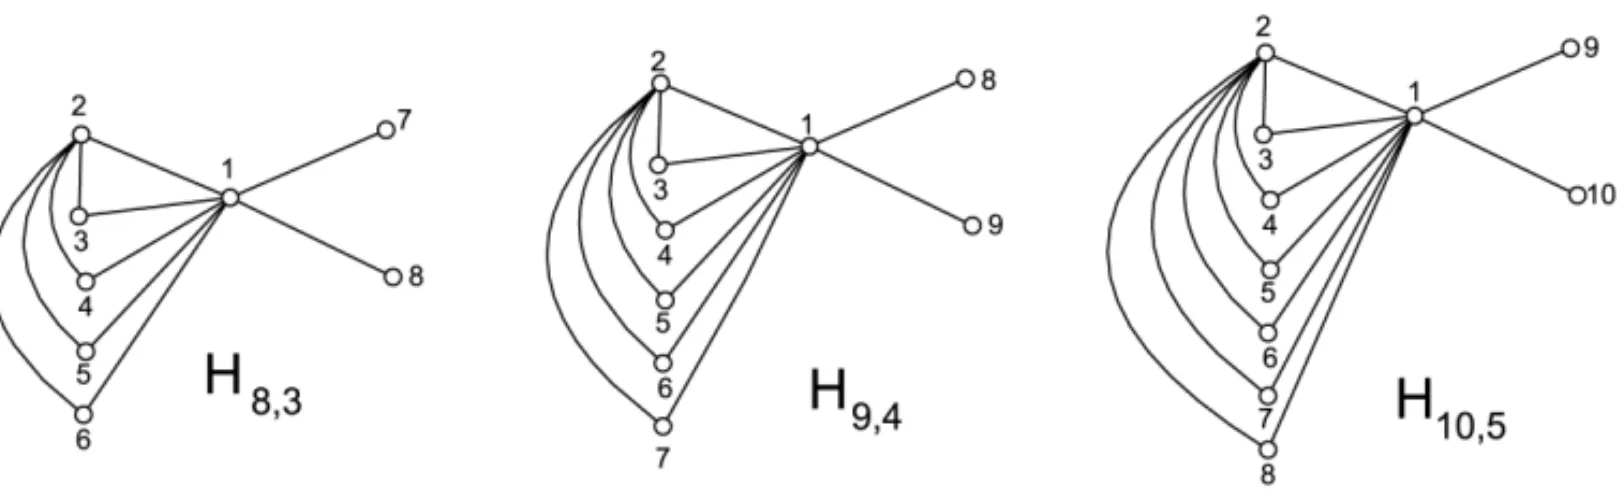 Figure 4 – Graphs H 8,3 , H 9,4 and H 10,5 .